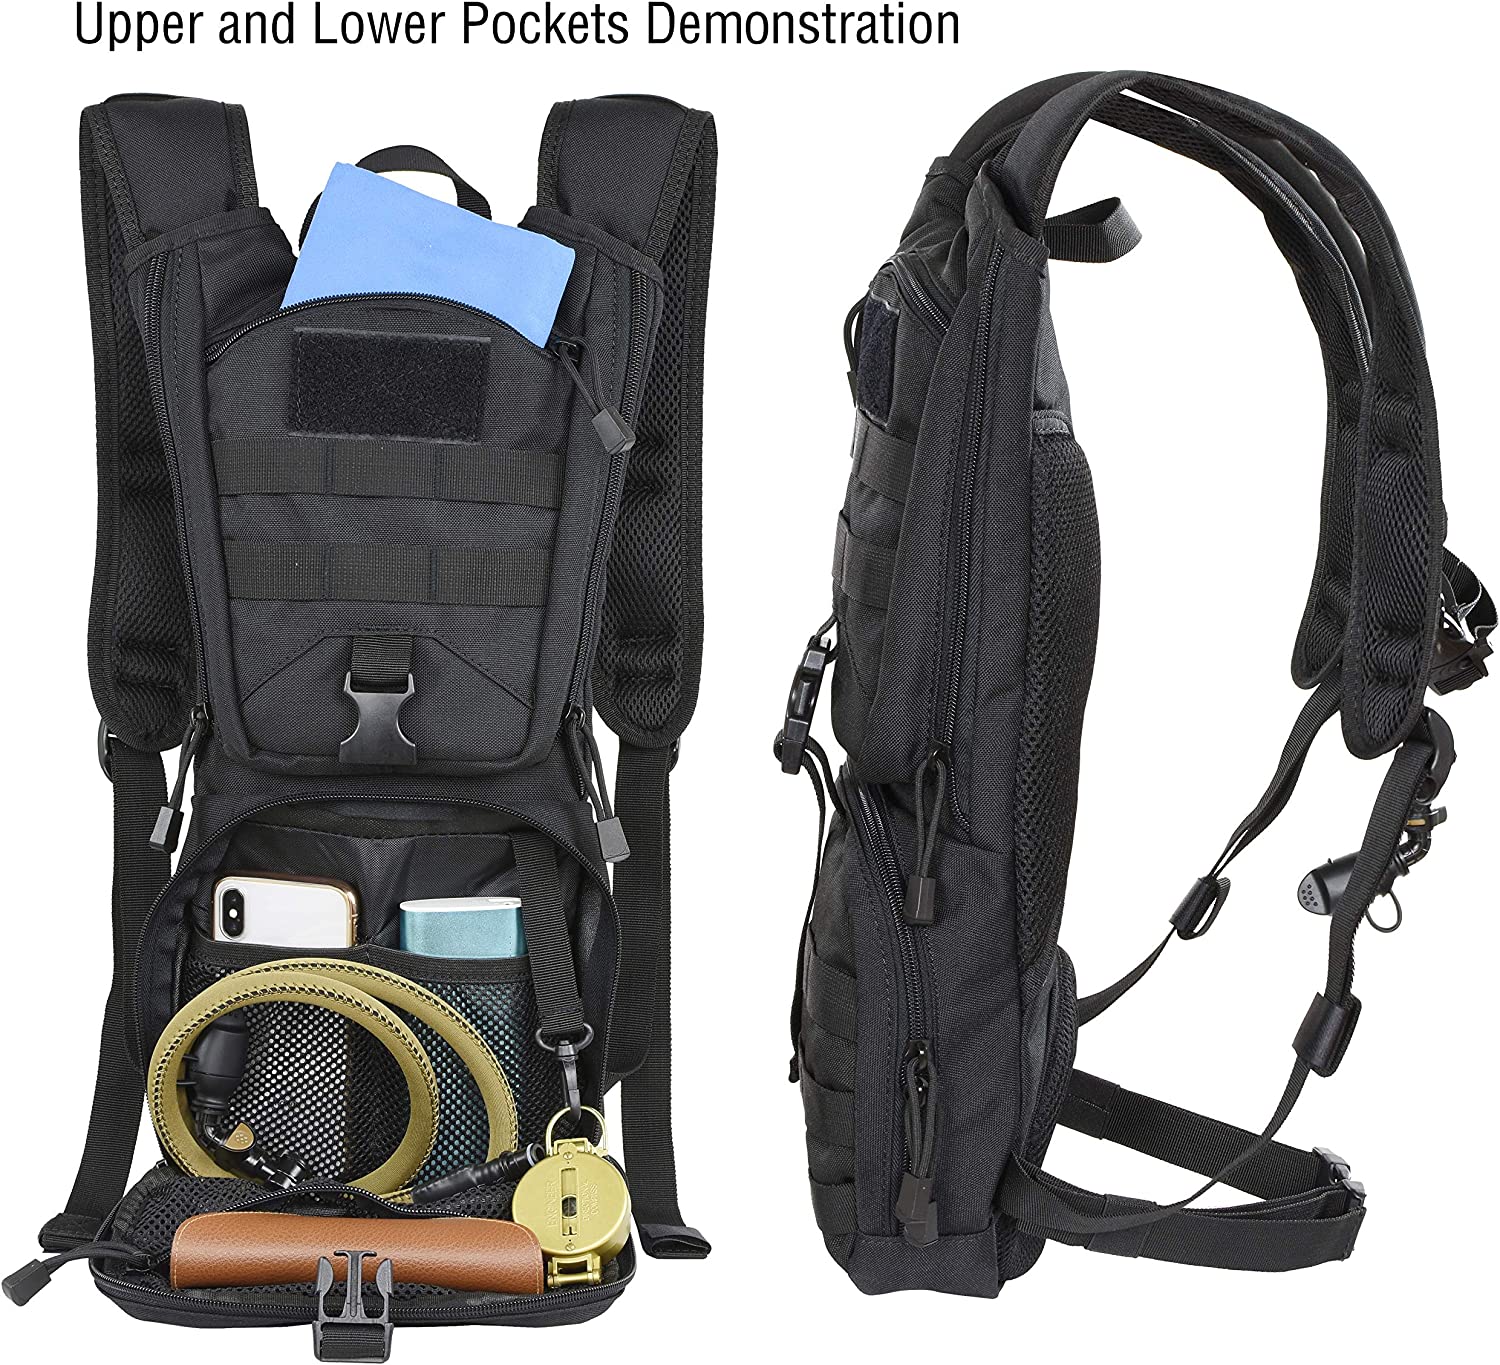 Tactical Hydration Backpack Pack with 3L BPA Free Water Bladder for Hiking, Climbing, Hunting - image 3 of 6